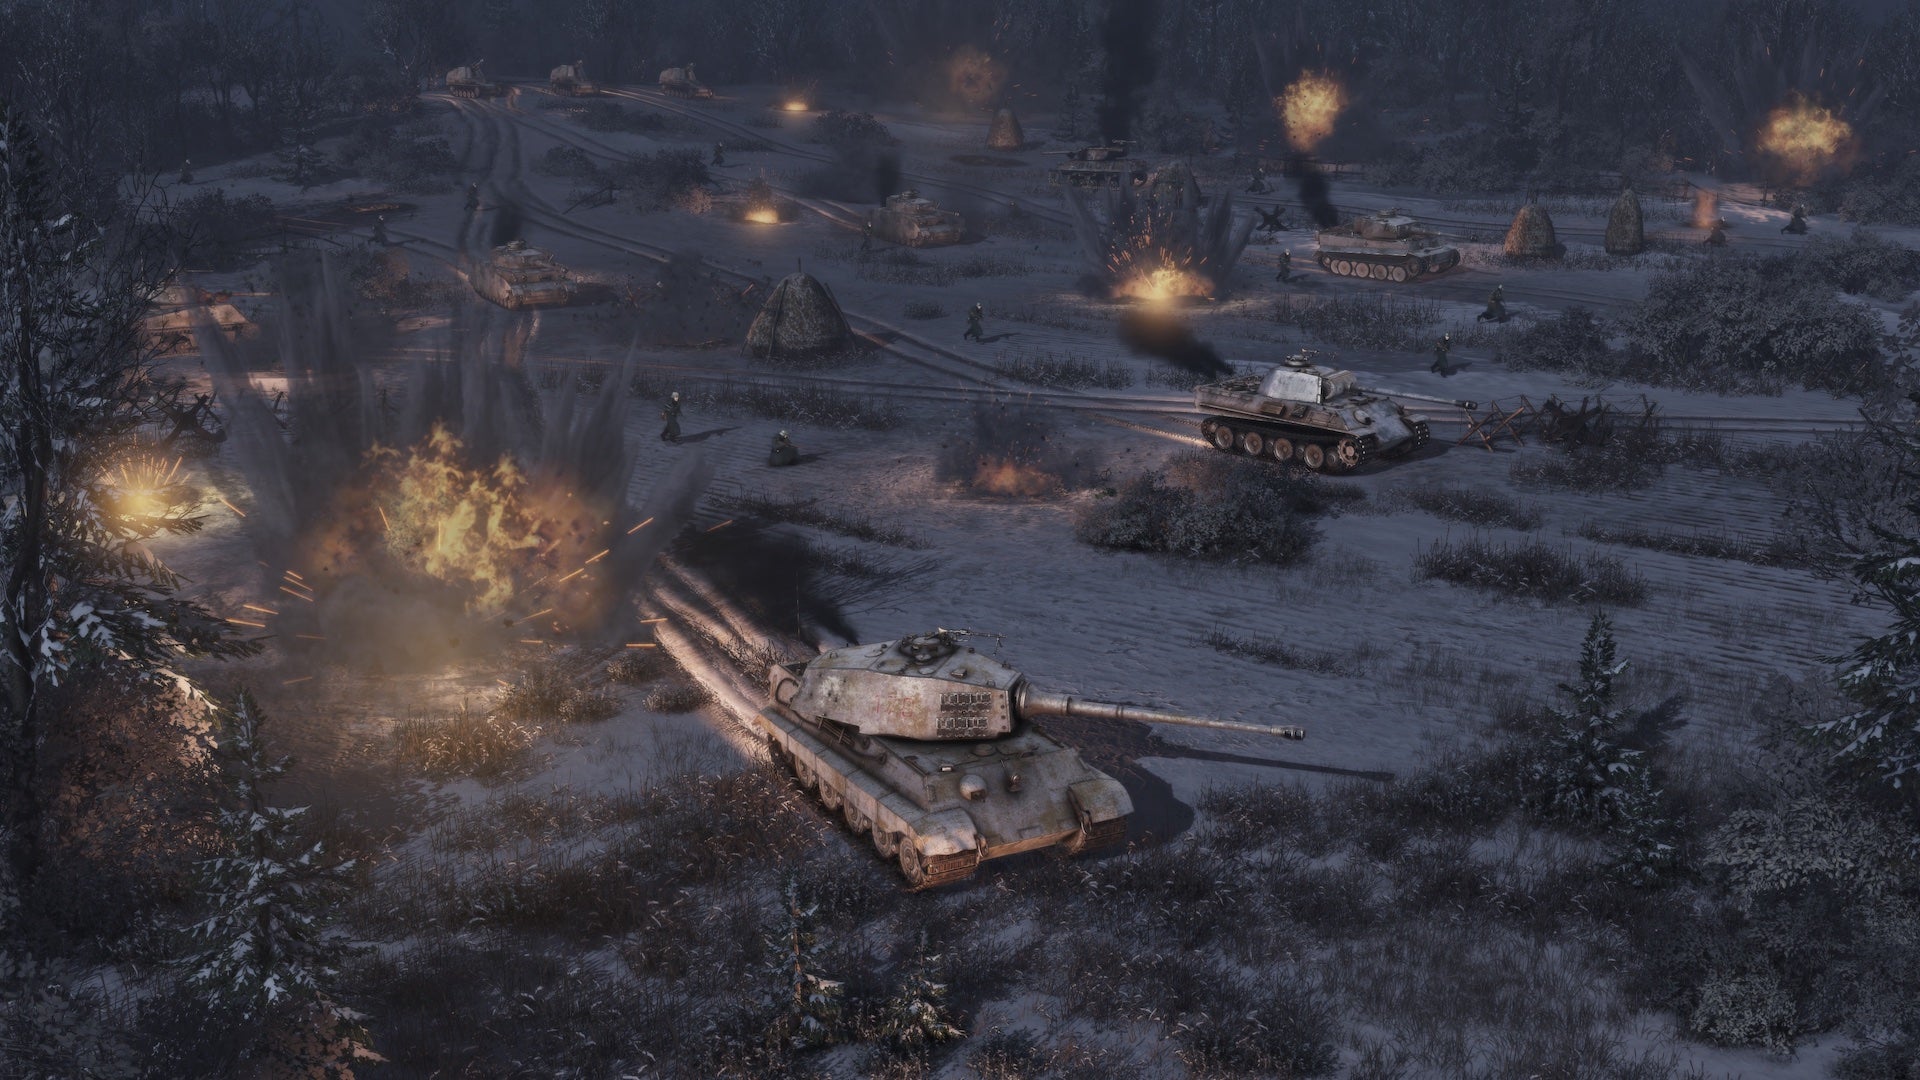 Image for Men of War 2 is a follow-up to the classic RTS game, and it's coming in 2022